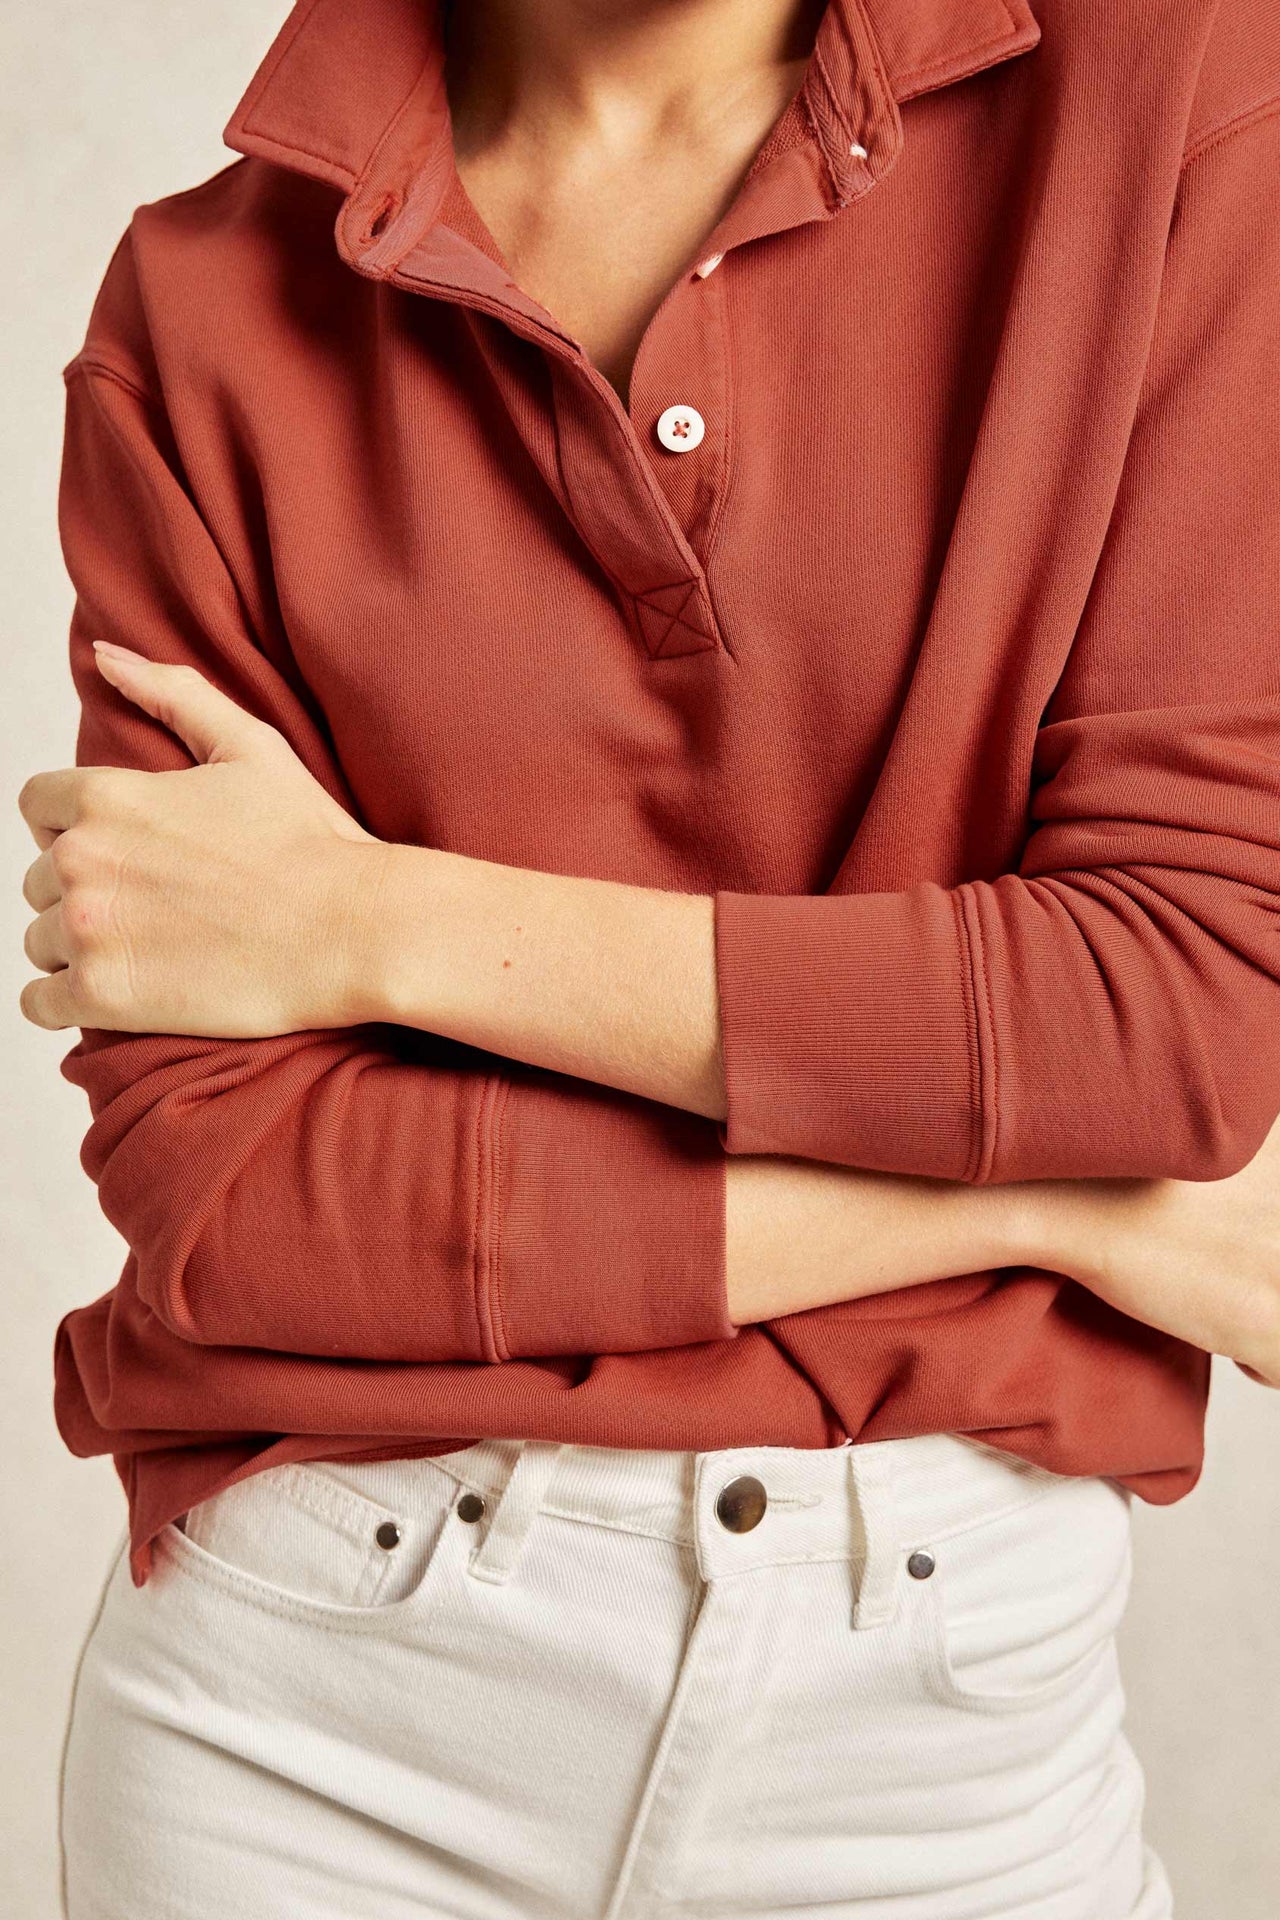 The Kittisford is a trusty staple, cut from cotton with a subtle faded wash. Loopback women’s maple red orange sweatshirt in classic rugby style, garment dyed for vintage look. A soft, vintage-inspired sweat. Casual wear. Size XS, S, M, L, XL. Machine wash.